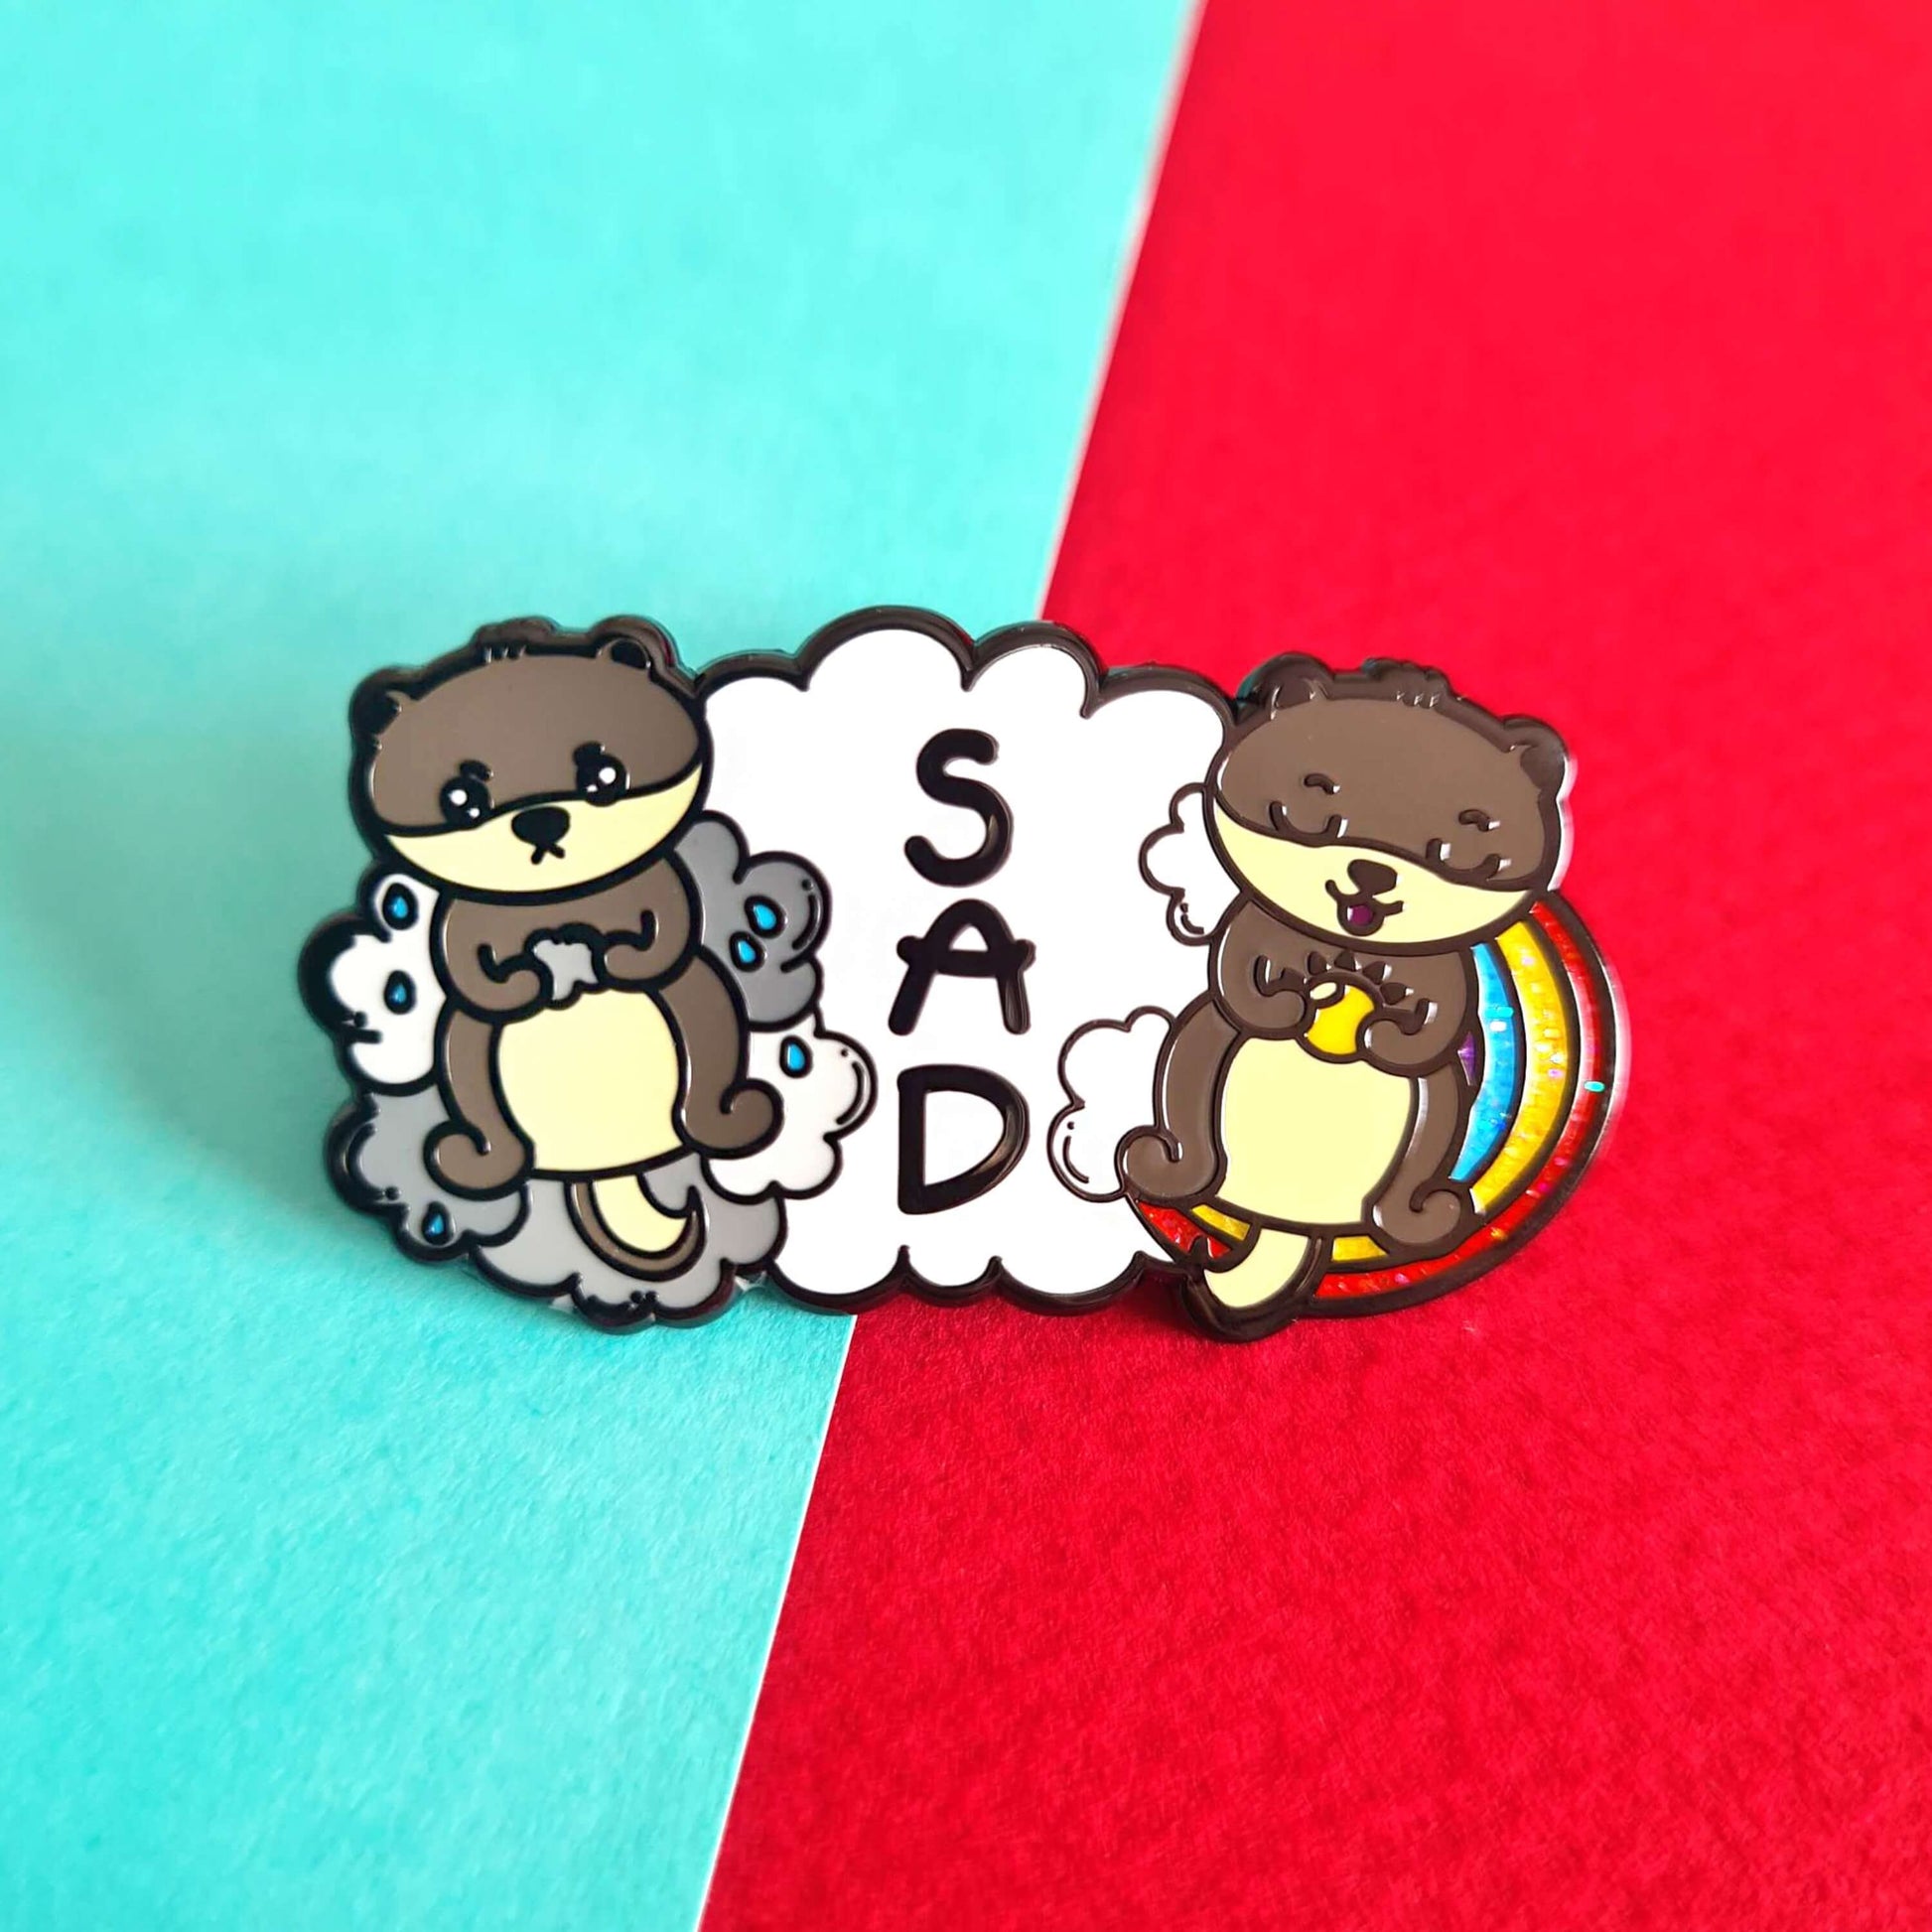 The Seasonal Affective Otter Enamel Pin - Seasonal Affective Disorder SAD on a red and blue background. The cloud shaped pin has two otters on either side, one sad on a raincloud clutching a raincloud and the other smiling on a rainbow clutching a sunshine. In the middle is the initials 'SAD'. The hand drawn design is raising awareness for Seasonal Affective Disorder.